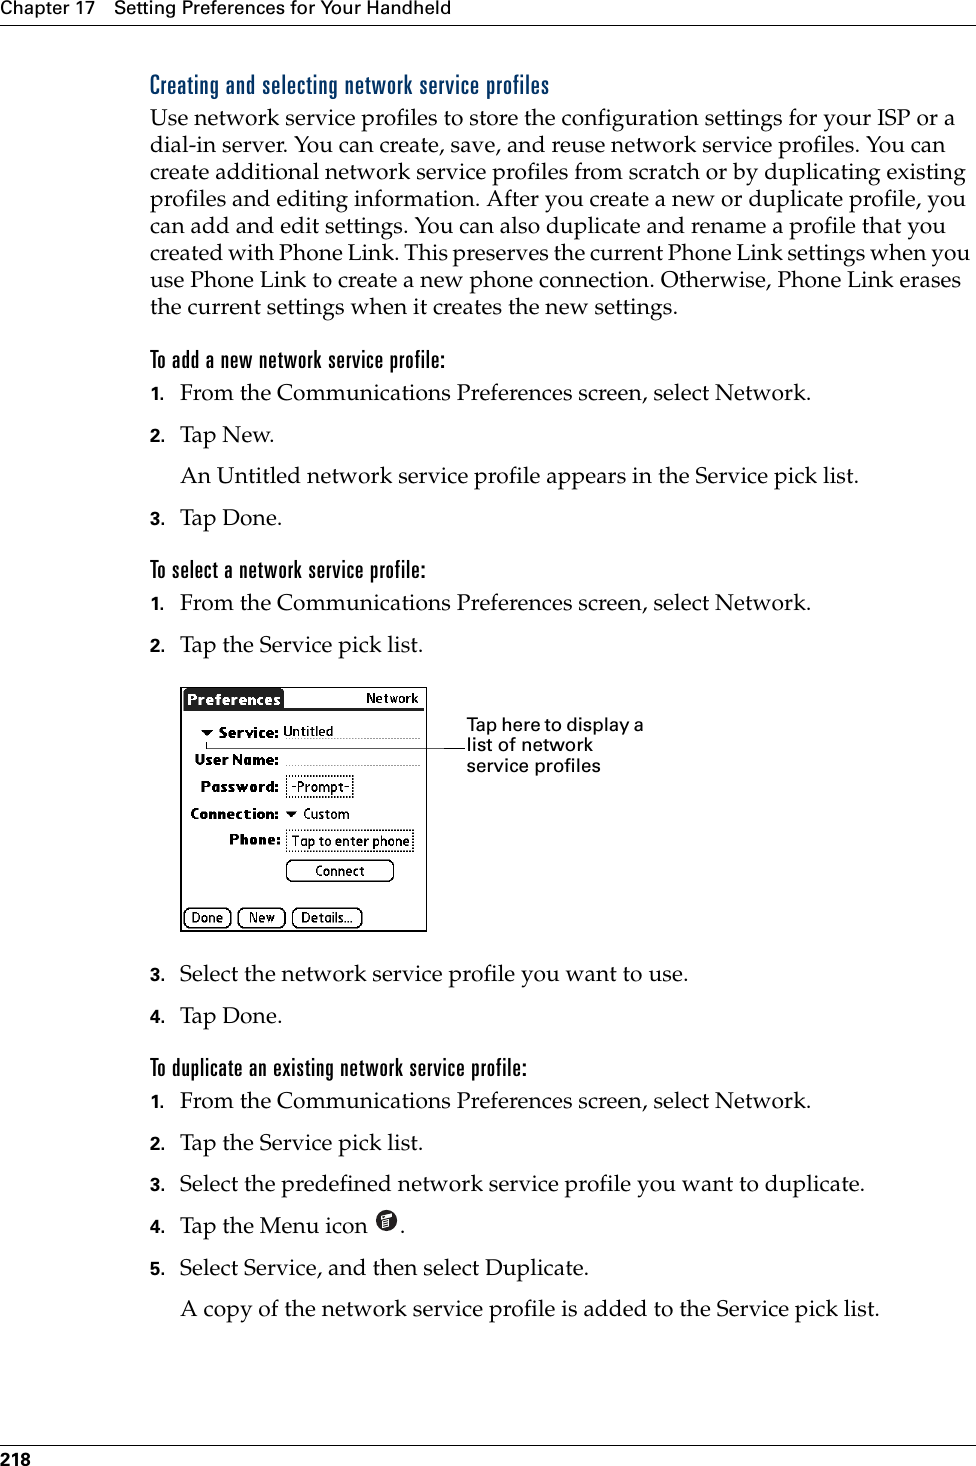 Chapter 17 Setting Preferences for Your Handheld218Creating and selecting network service profilesUse network service profiles to store the configuration settings for your ISP or a dial-in server. You can create, save, and reuse network service profiles. You can create additional network service profiles from scratch or by duplicating existing profiles and editing information. After you create a new or duplicate profile, you can add and edit settings. You can also duplicate and rename a profile that you created with Phone Link. This preserves the current Phone Link settings when you use Phone Link to create a new phone connection. Otherwise, Phone Link erases the current settings when it creates the new settings.To add a new network service profile:1. From the Communications Preferences screen, select Network. 2. Tap N ew.An Untitled network service profile appears in the Service pick list.3. Tap Don e.To select a network service profile:1. From the Communications Preferences screen, select Network.2. Tap the Service pick list.3. Select the network service profile you want to use.4. Tap Don e .To duplicate an existing network service profile:1. From the Communications Preferences screen, select Network.2. Tap the Service pick list.3. Select the predefined network service profile you want to duplicate.4. Tap the Menu icon  . 5. Select Service, and then select Duplicate.A copy of the network service profile is added to the Service pick list.Tap here to display a list of network service profilesPalm, Inc. Confidential